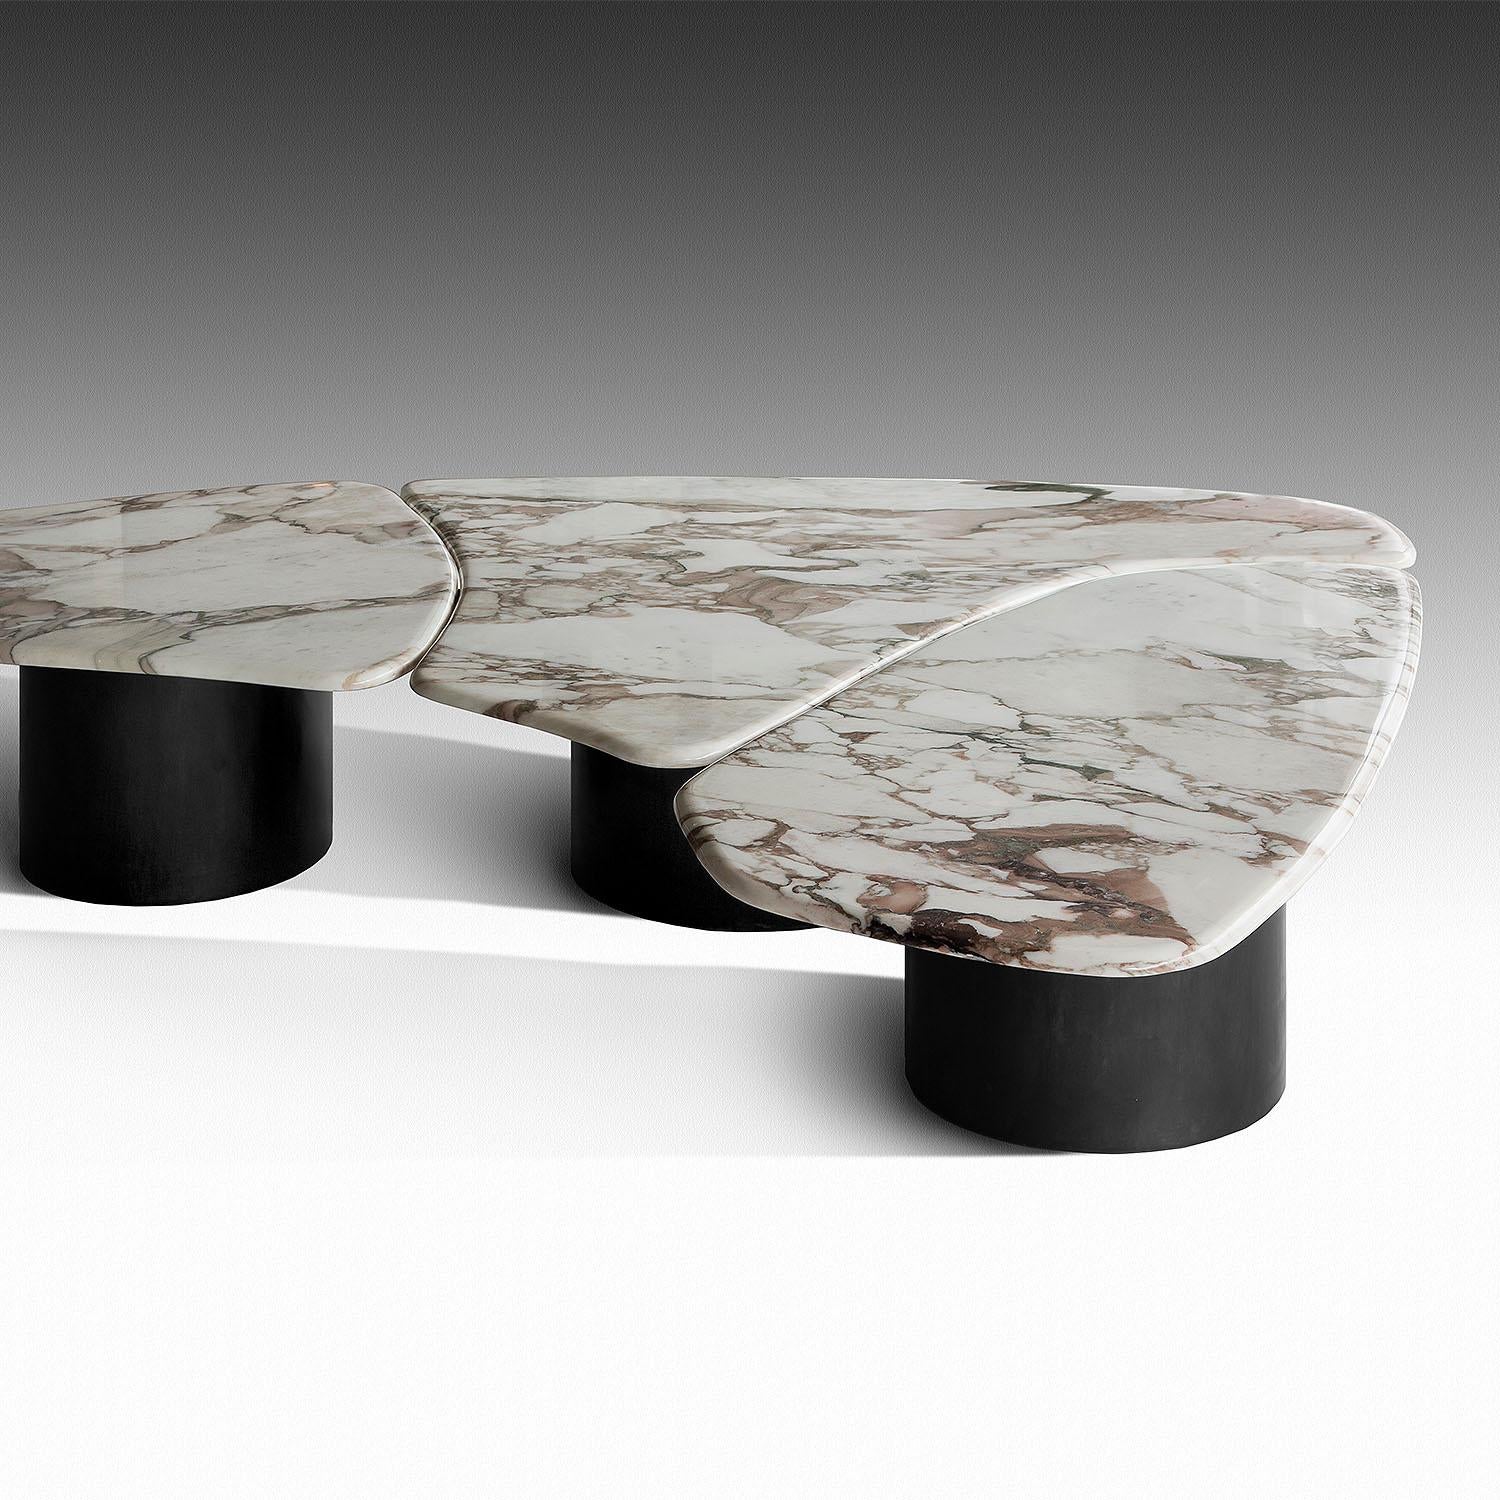 Portuguese Contemporary Marble Coffee Table, Tectra by Adam Court for Okha For Sale